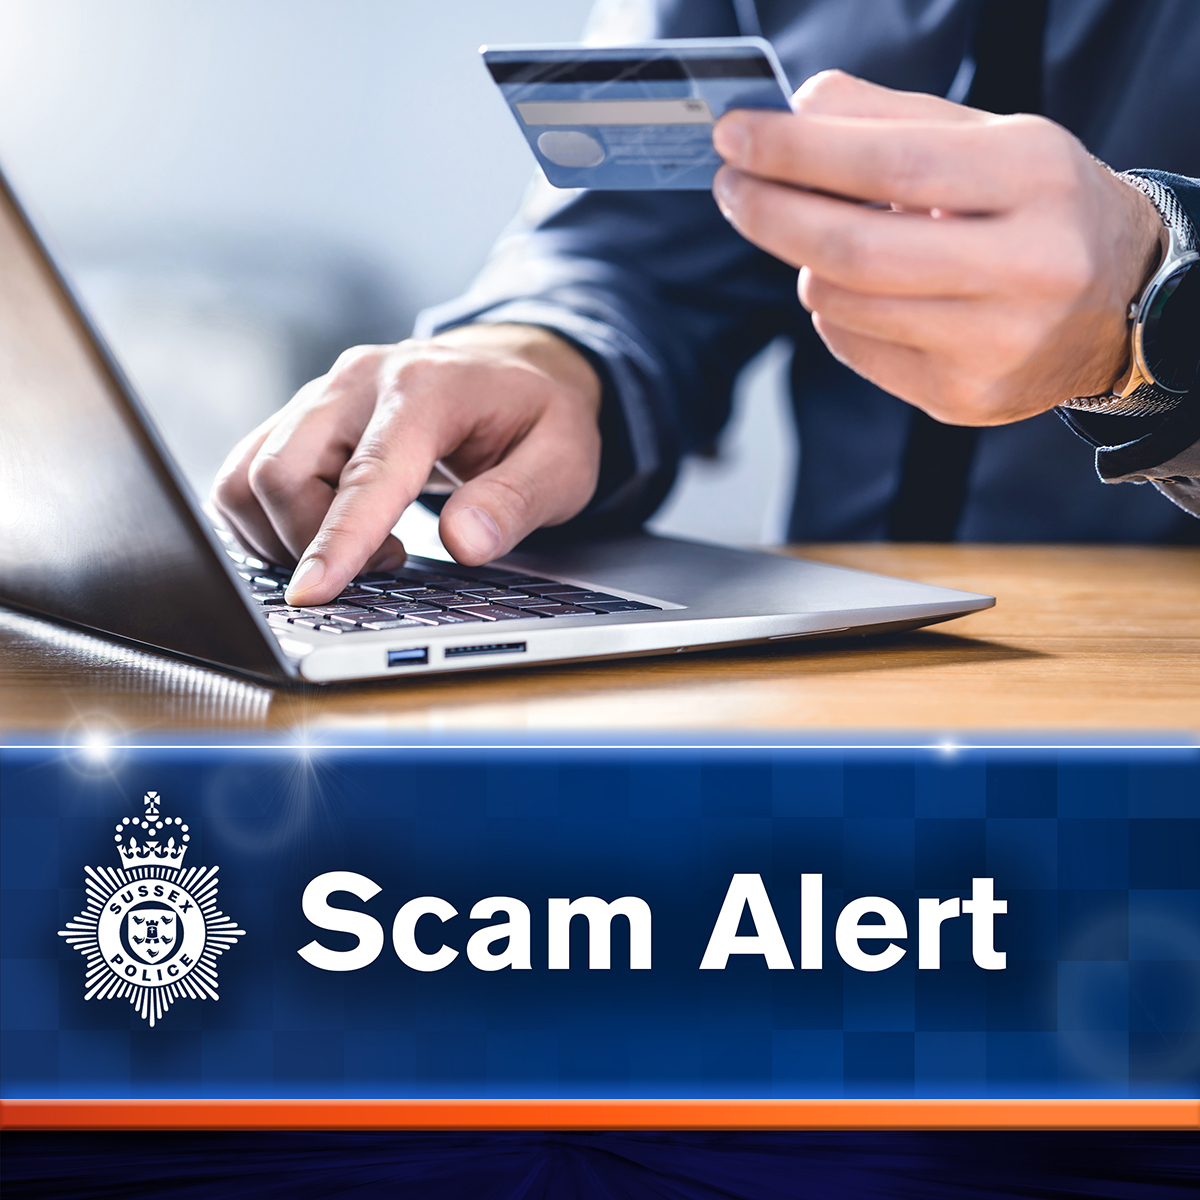 Read the latest Sussex Police Fraud Newsletter;& by following our tips & encouraging family, friends & colleagues to do so too, you can reduce the risk of becoming a victim ➡️ spkl.io/601040JLY Focus on doorstep callers, risks of public Wi-Fi & recent Southern Water scam